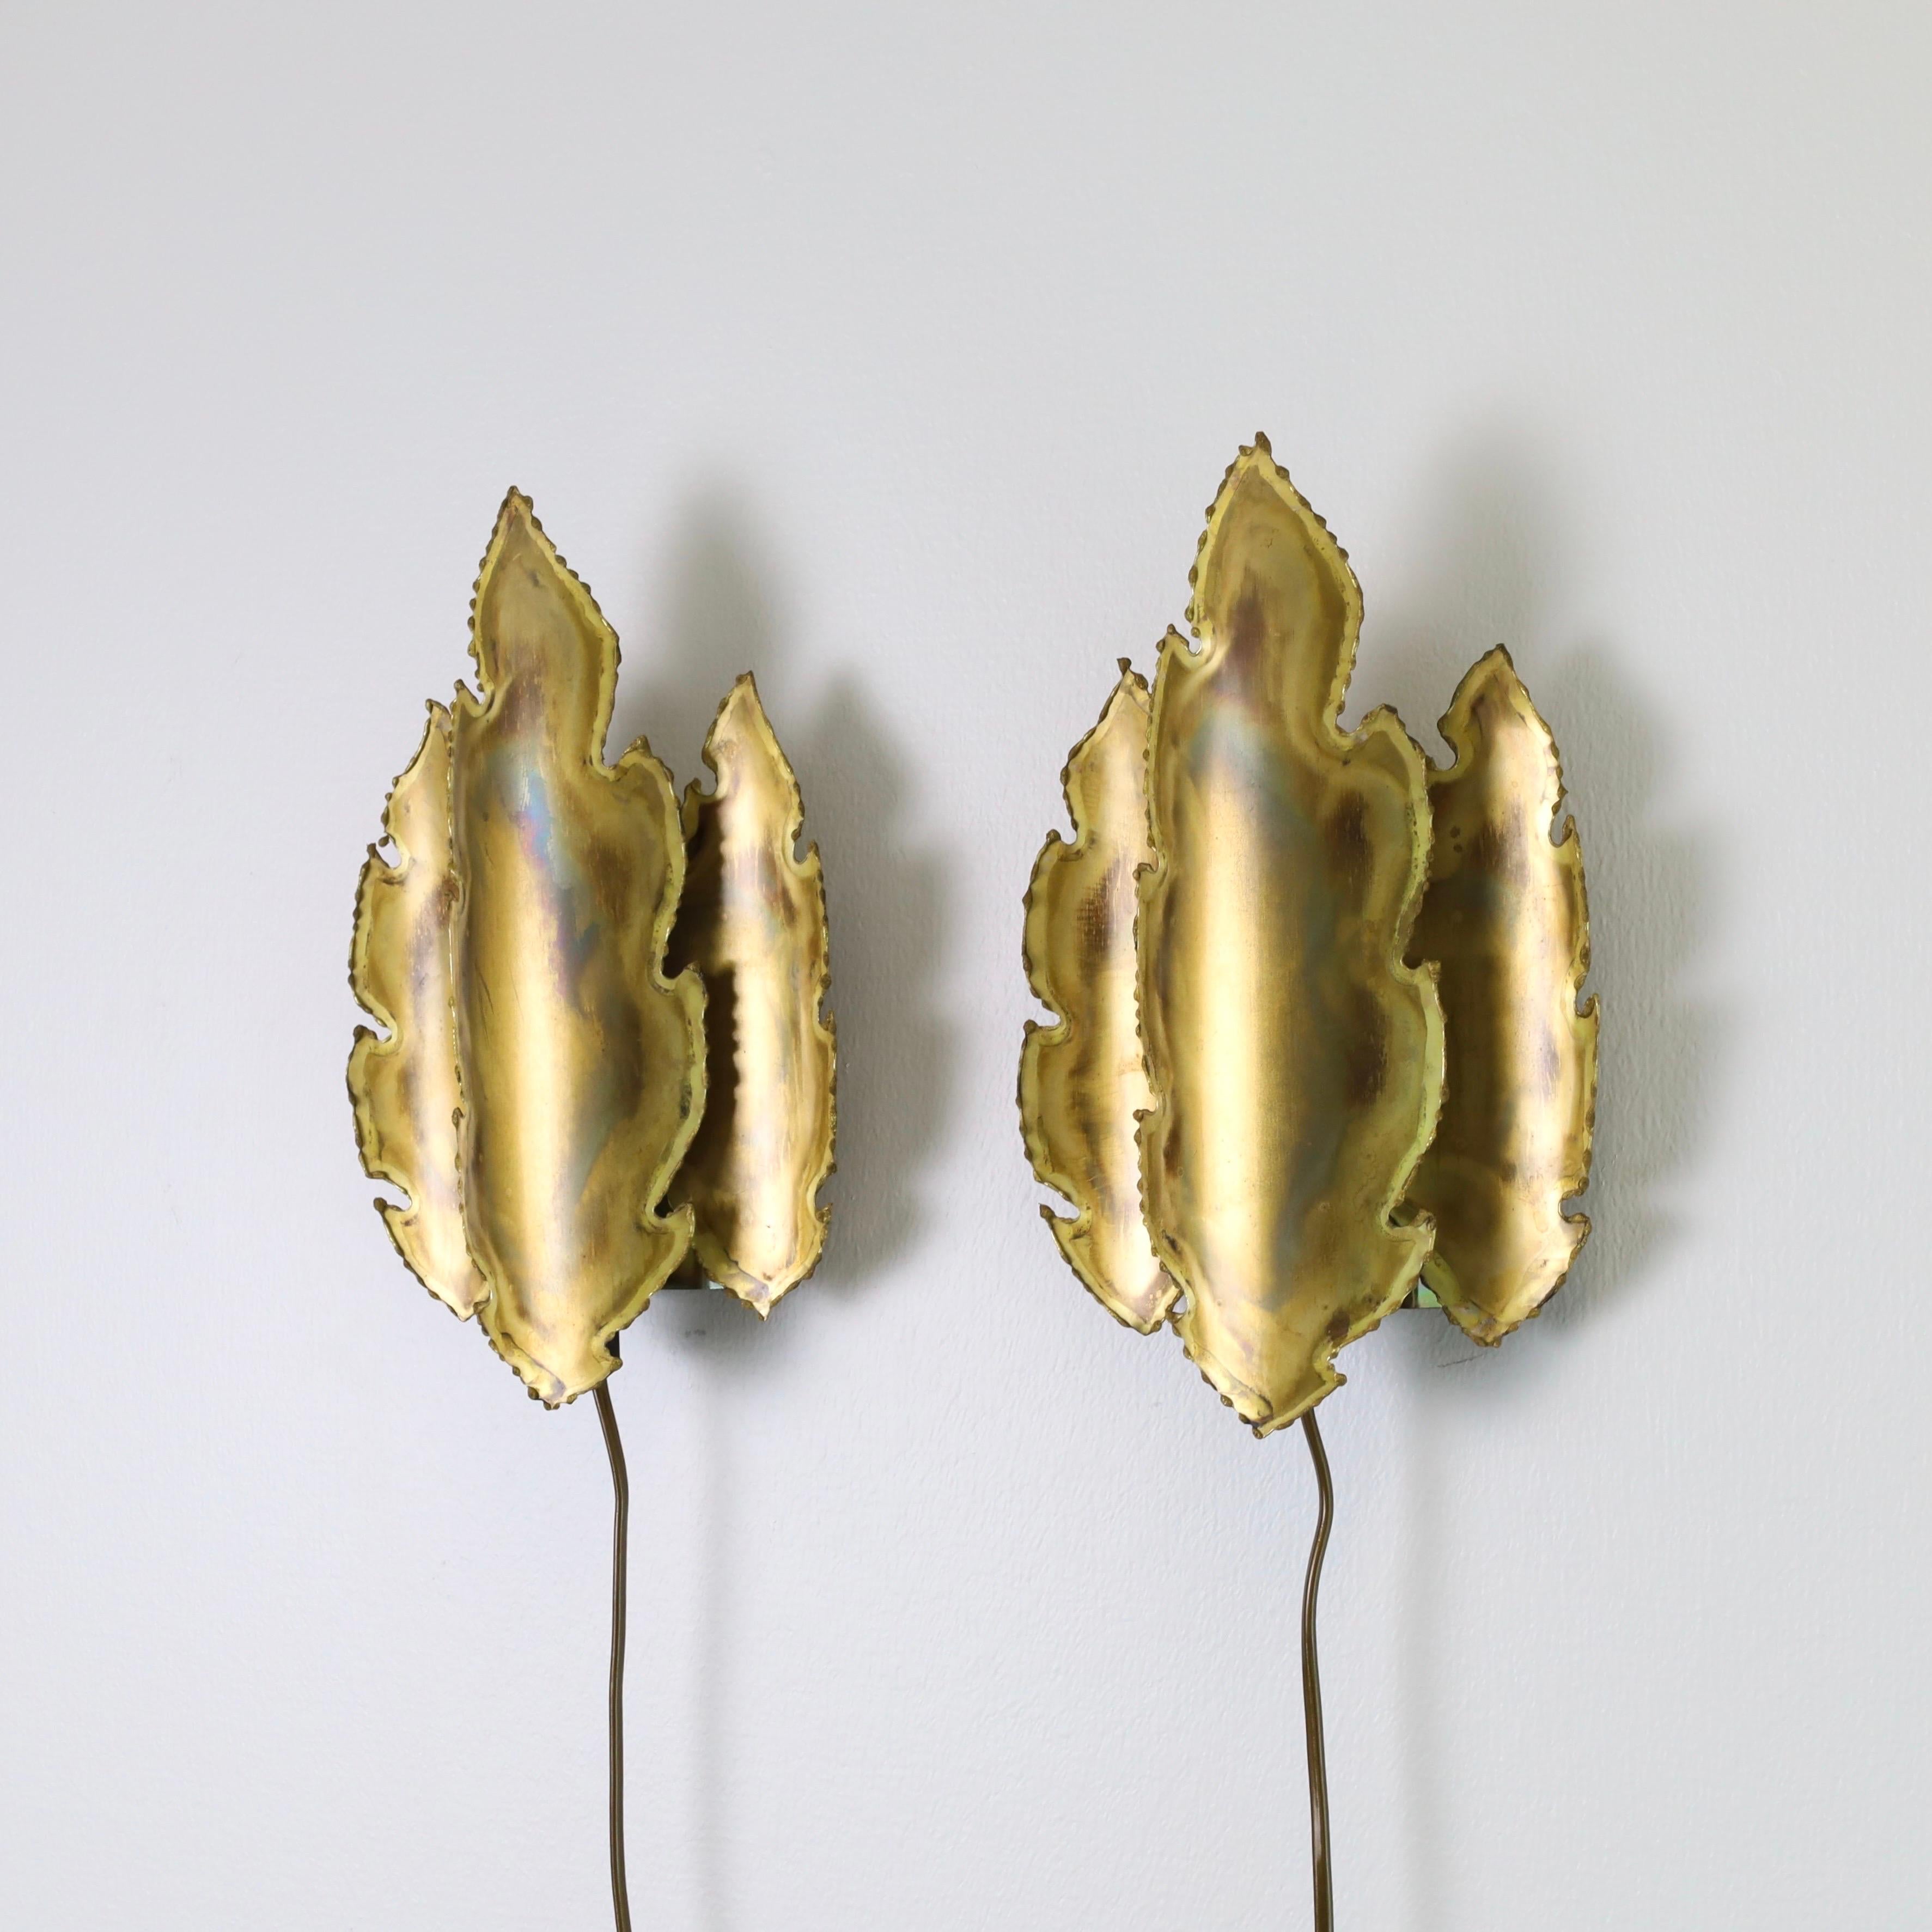 Mid-20th Century Pair of Leaf-Shaped Brass Wall Lamps by Svend Aage Holm Sorensen, 1960s, Denmark For Sale